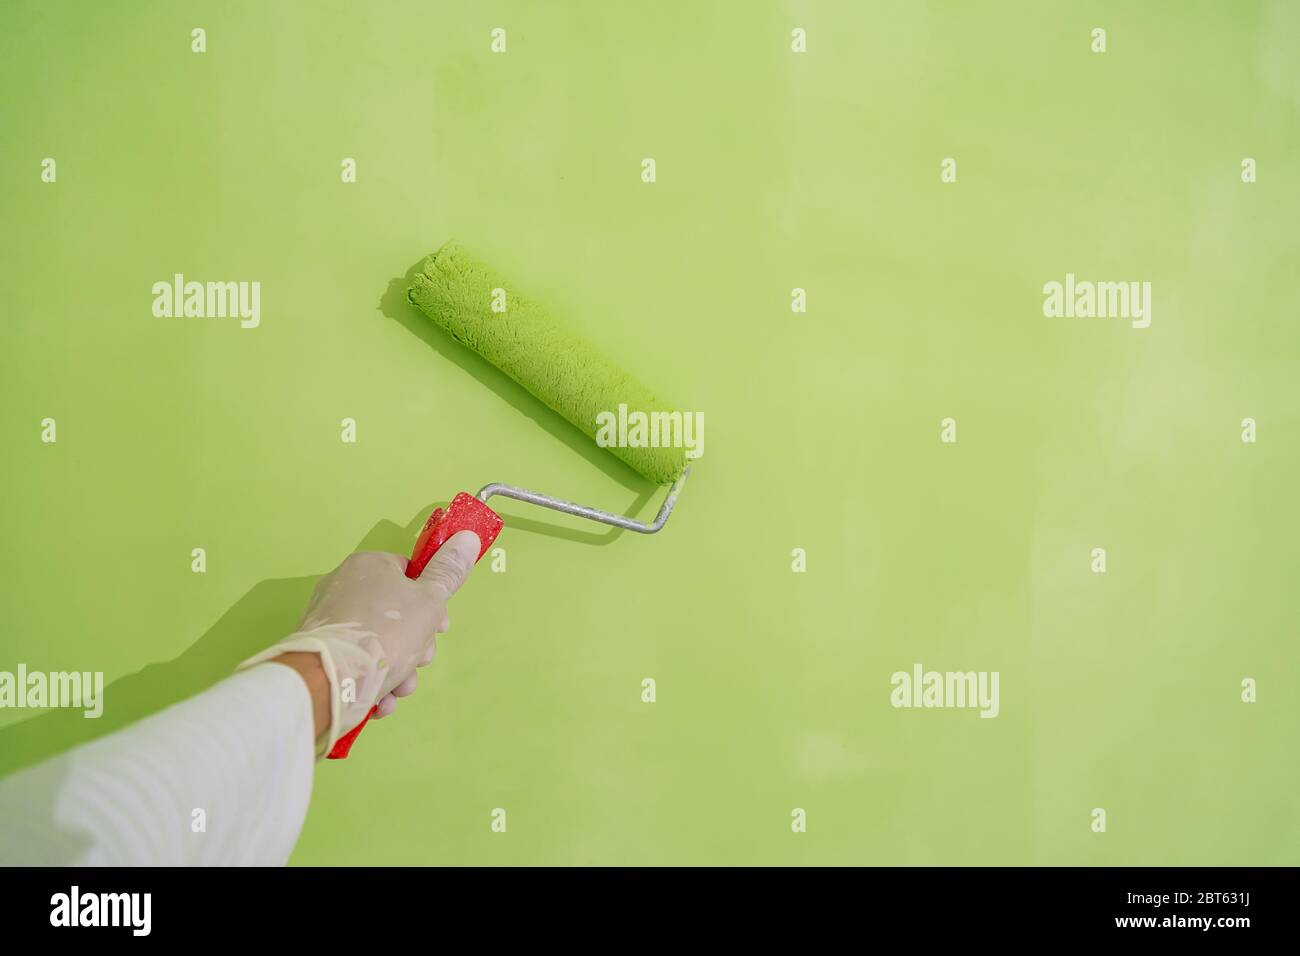 Painter with painting brush in hand painting a wall green Stock Photo